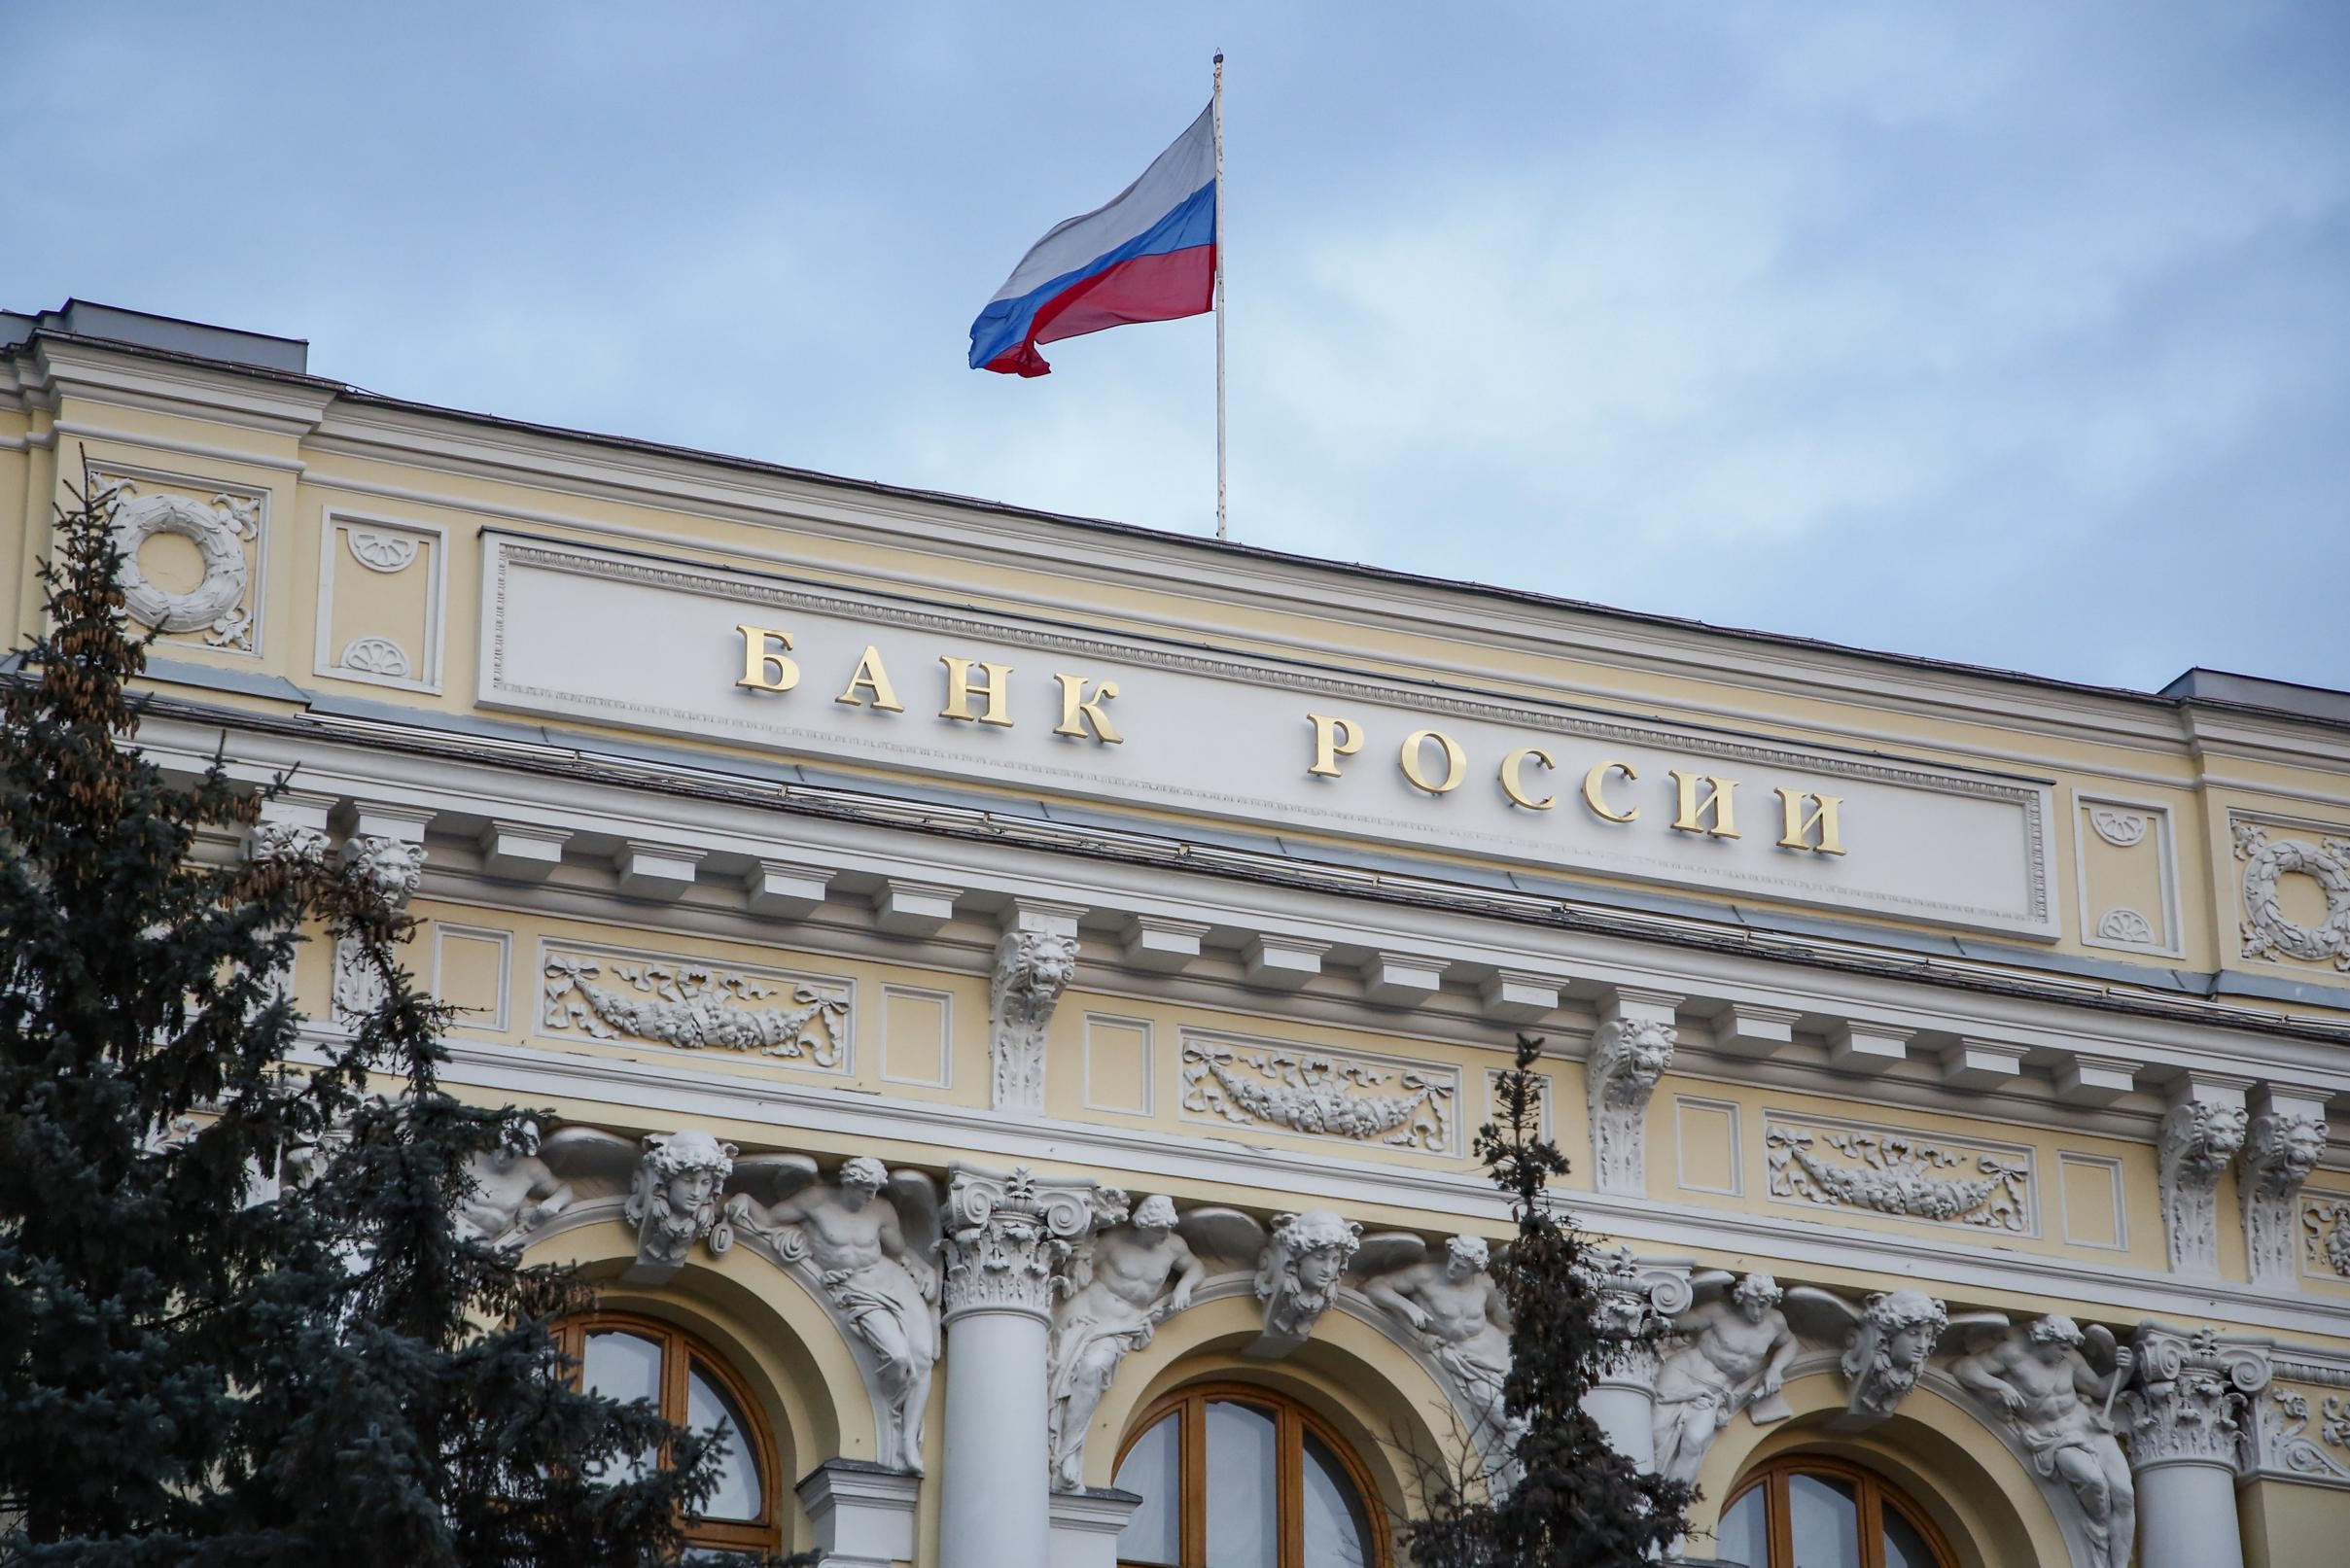 West hits Russia at heart of banking with sanctions (and ordinary Russian will feel that too)